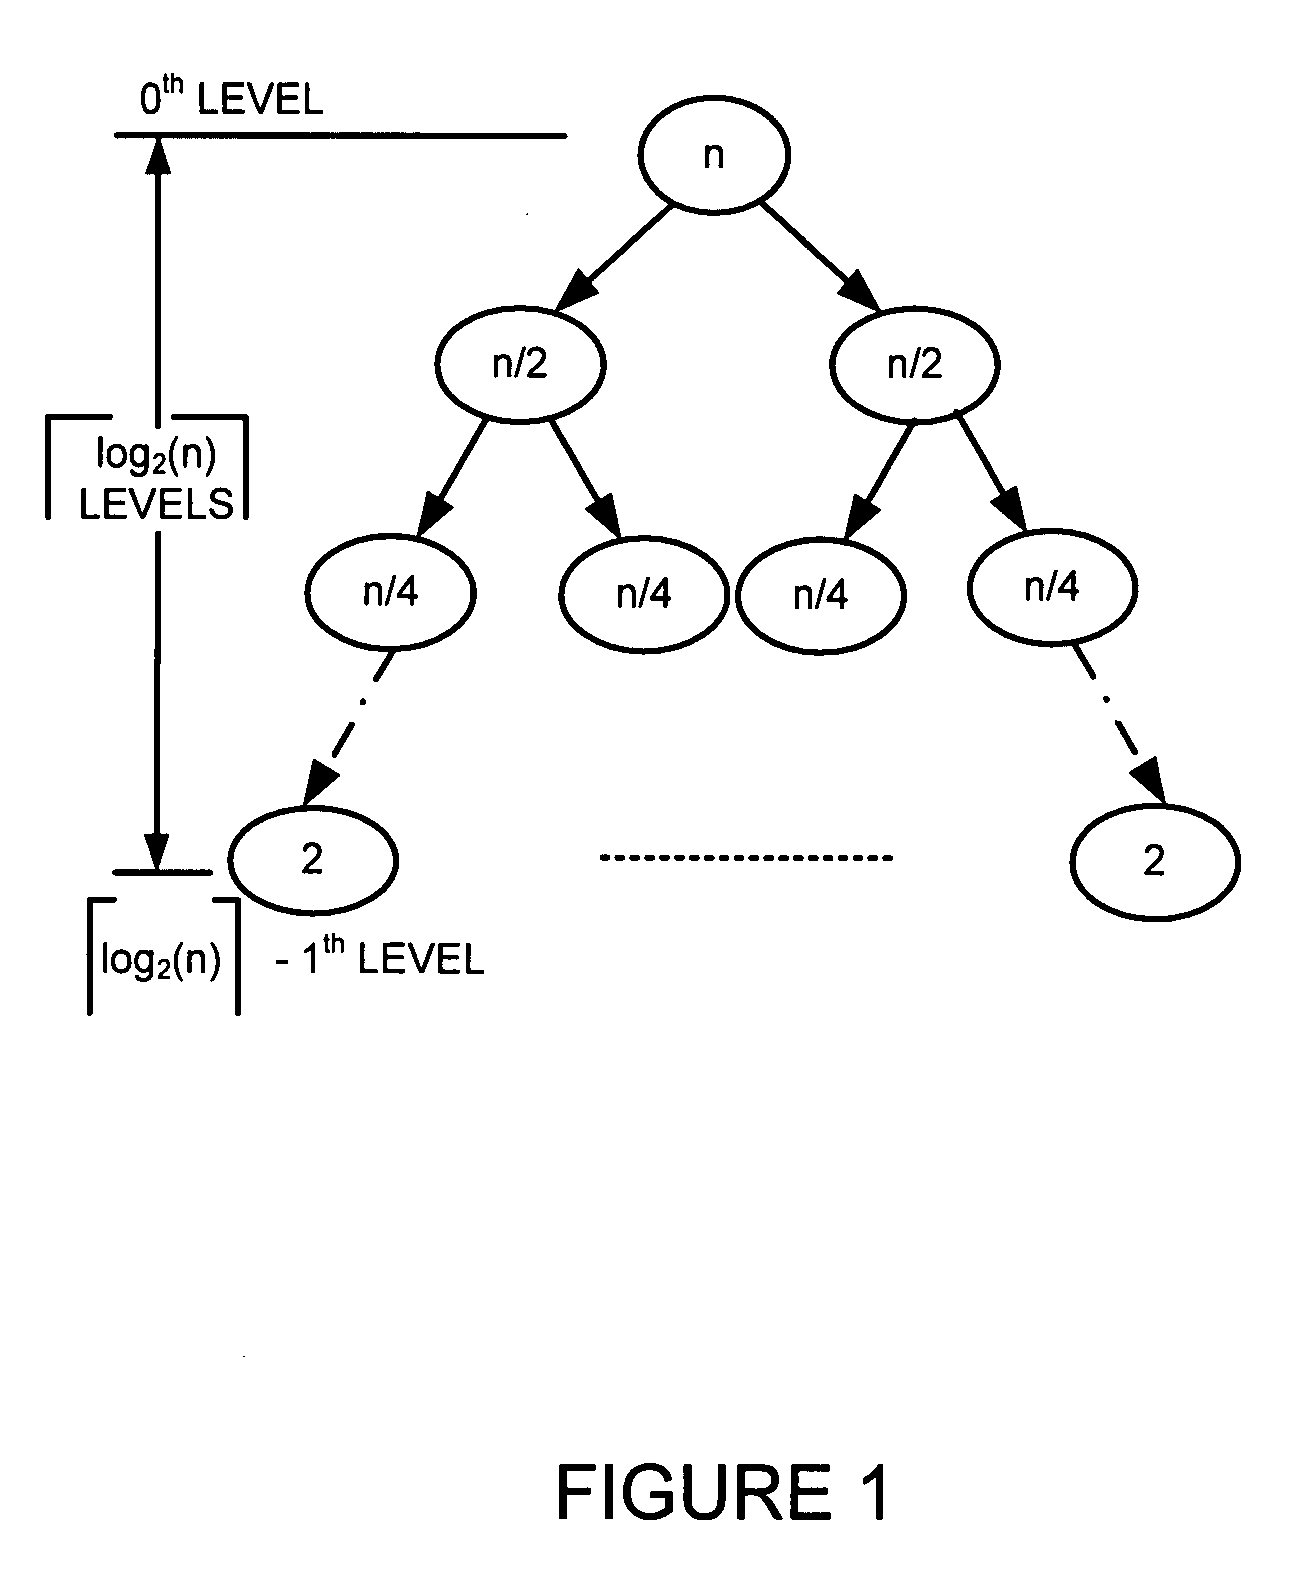 Detecting whether an arbitrary-length bit string input matches one of a plurality of known arbitrary-length bit strings using a hierarchical data structure